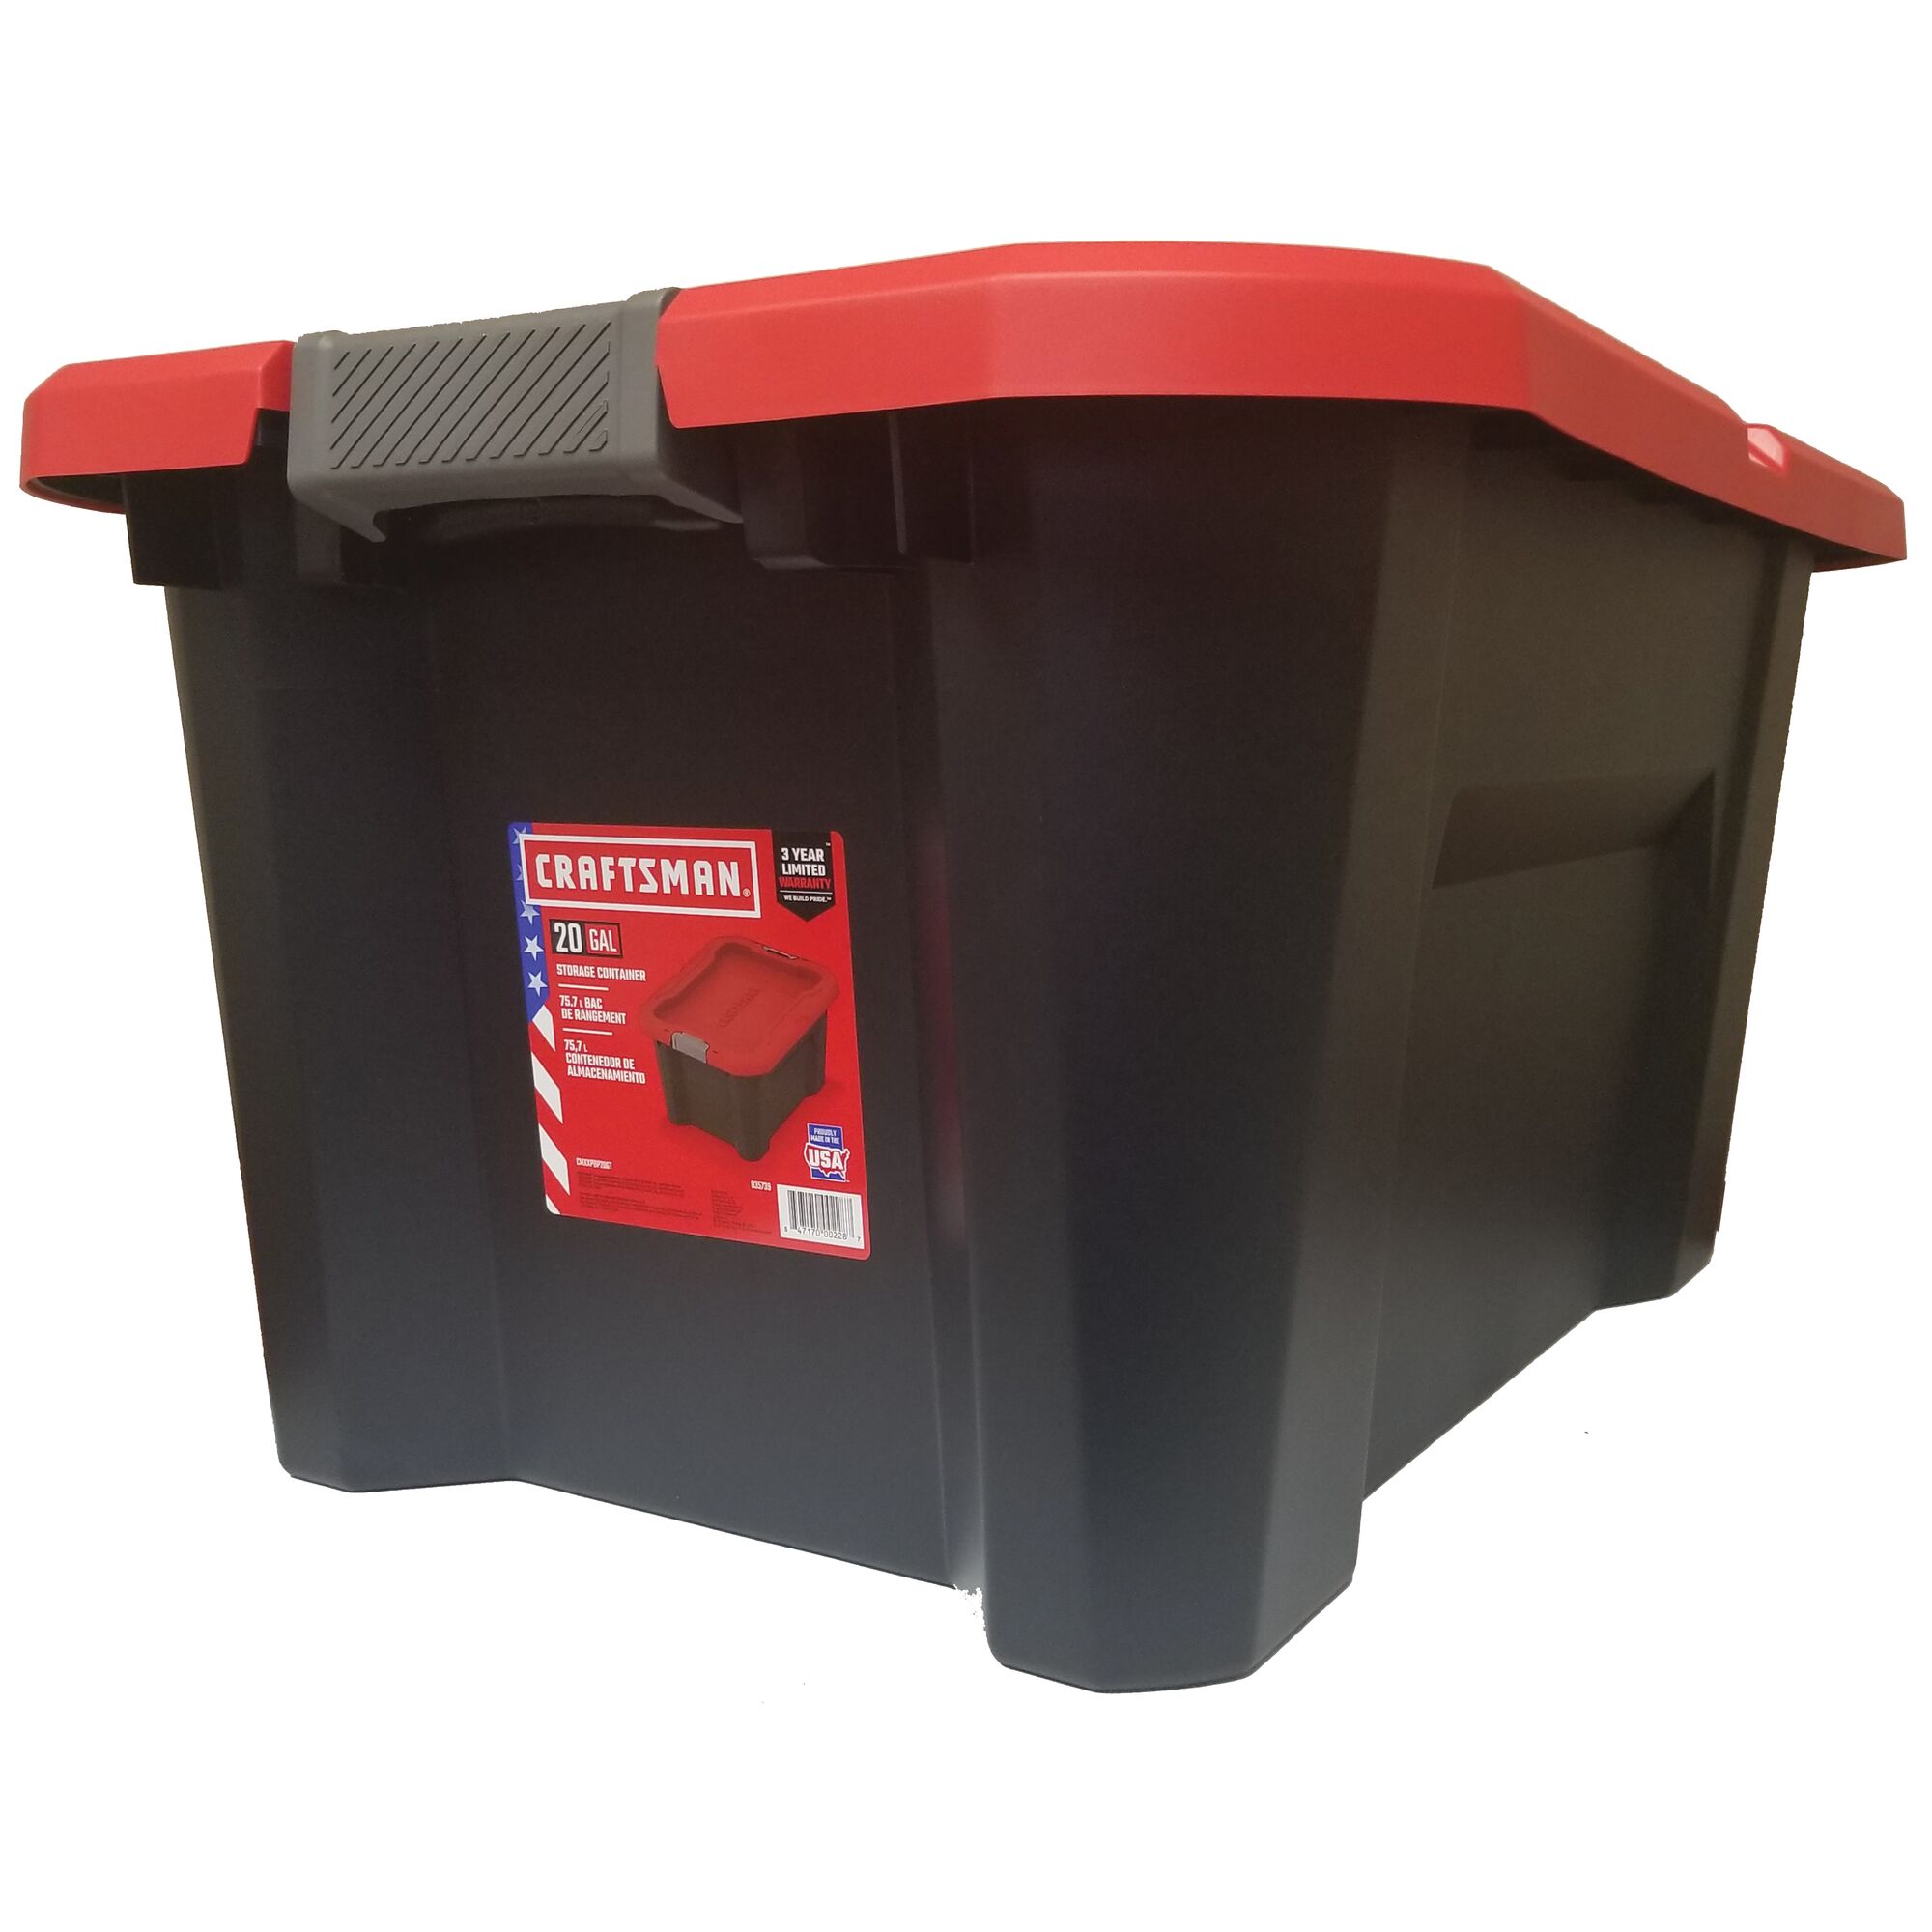 Right profile of 20 Gallon latching tote in packaging.